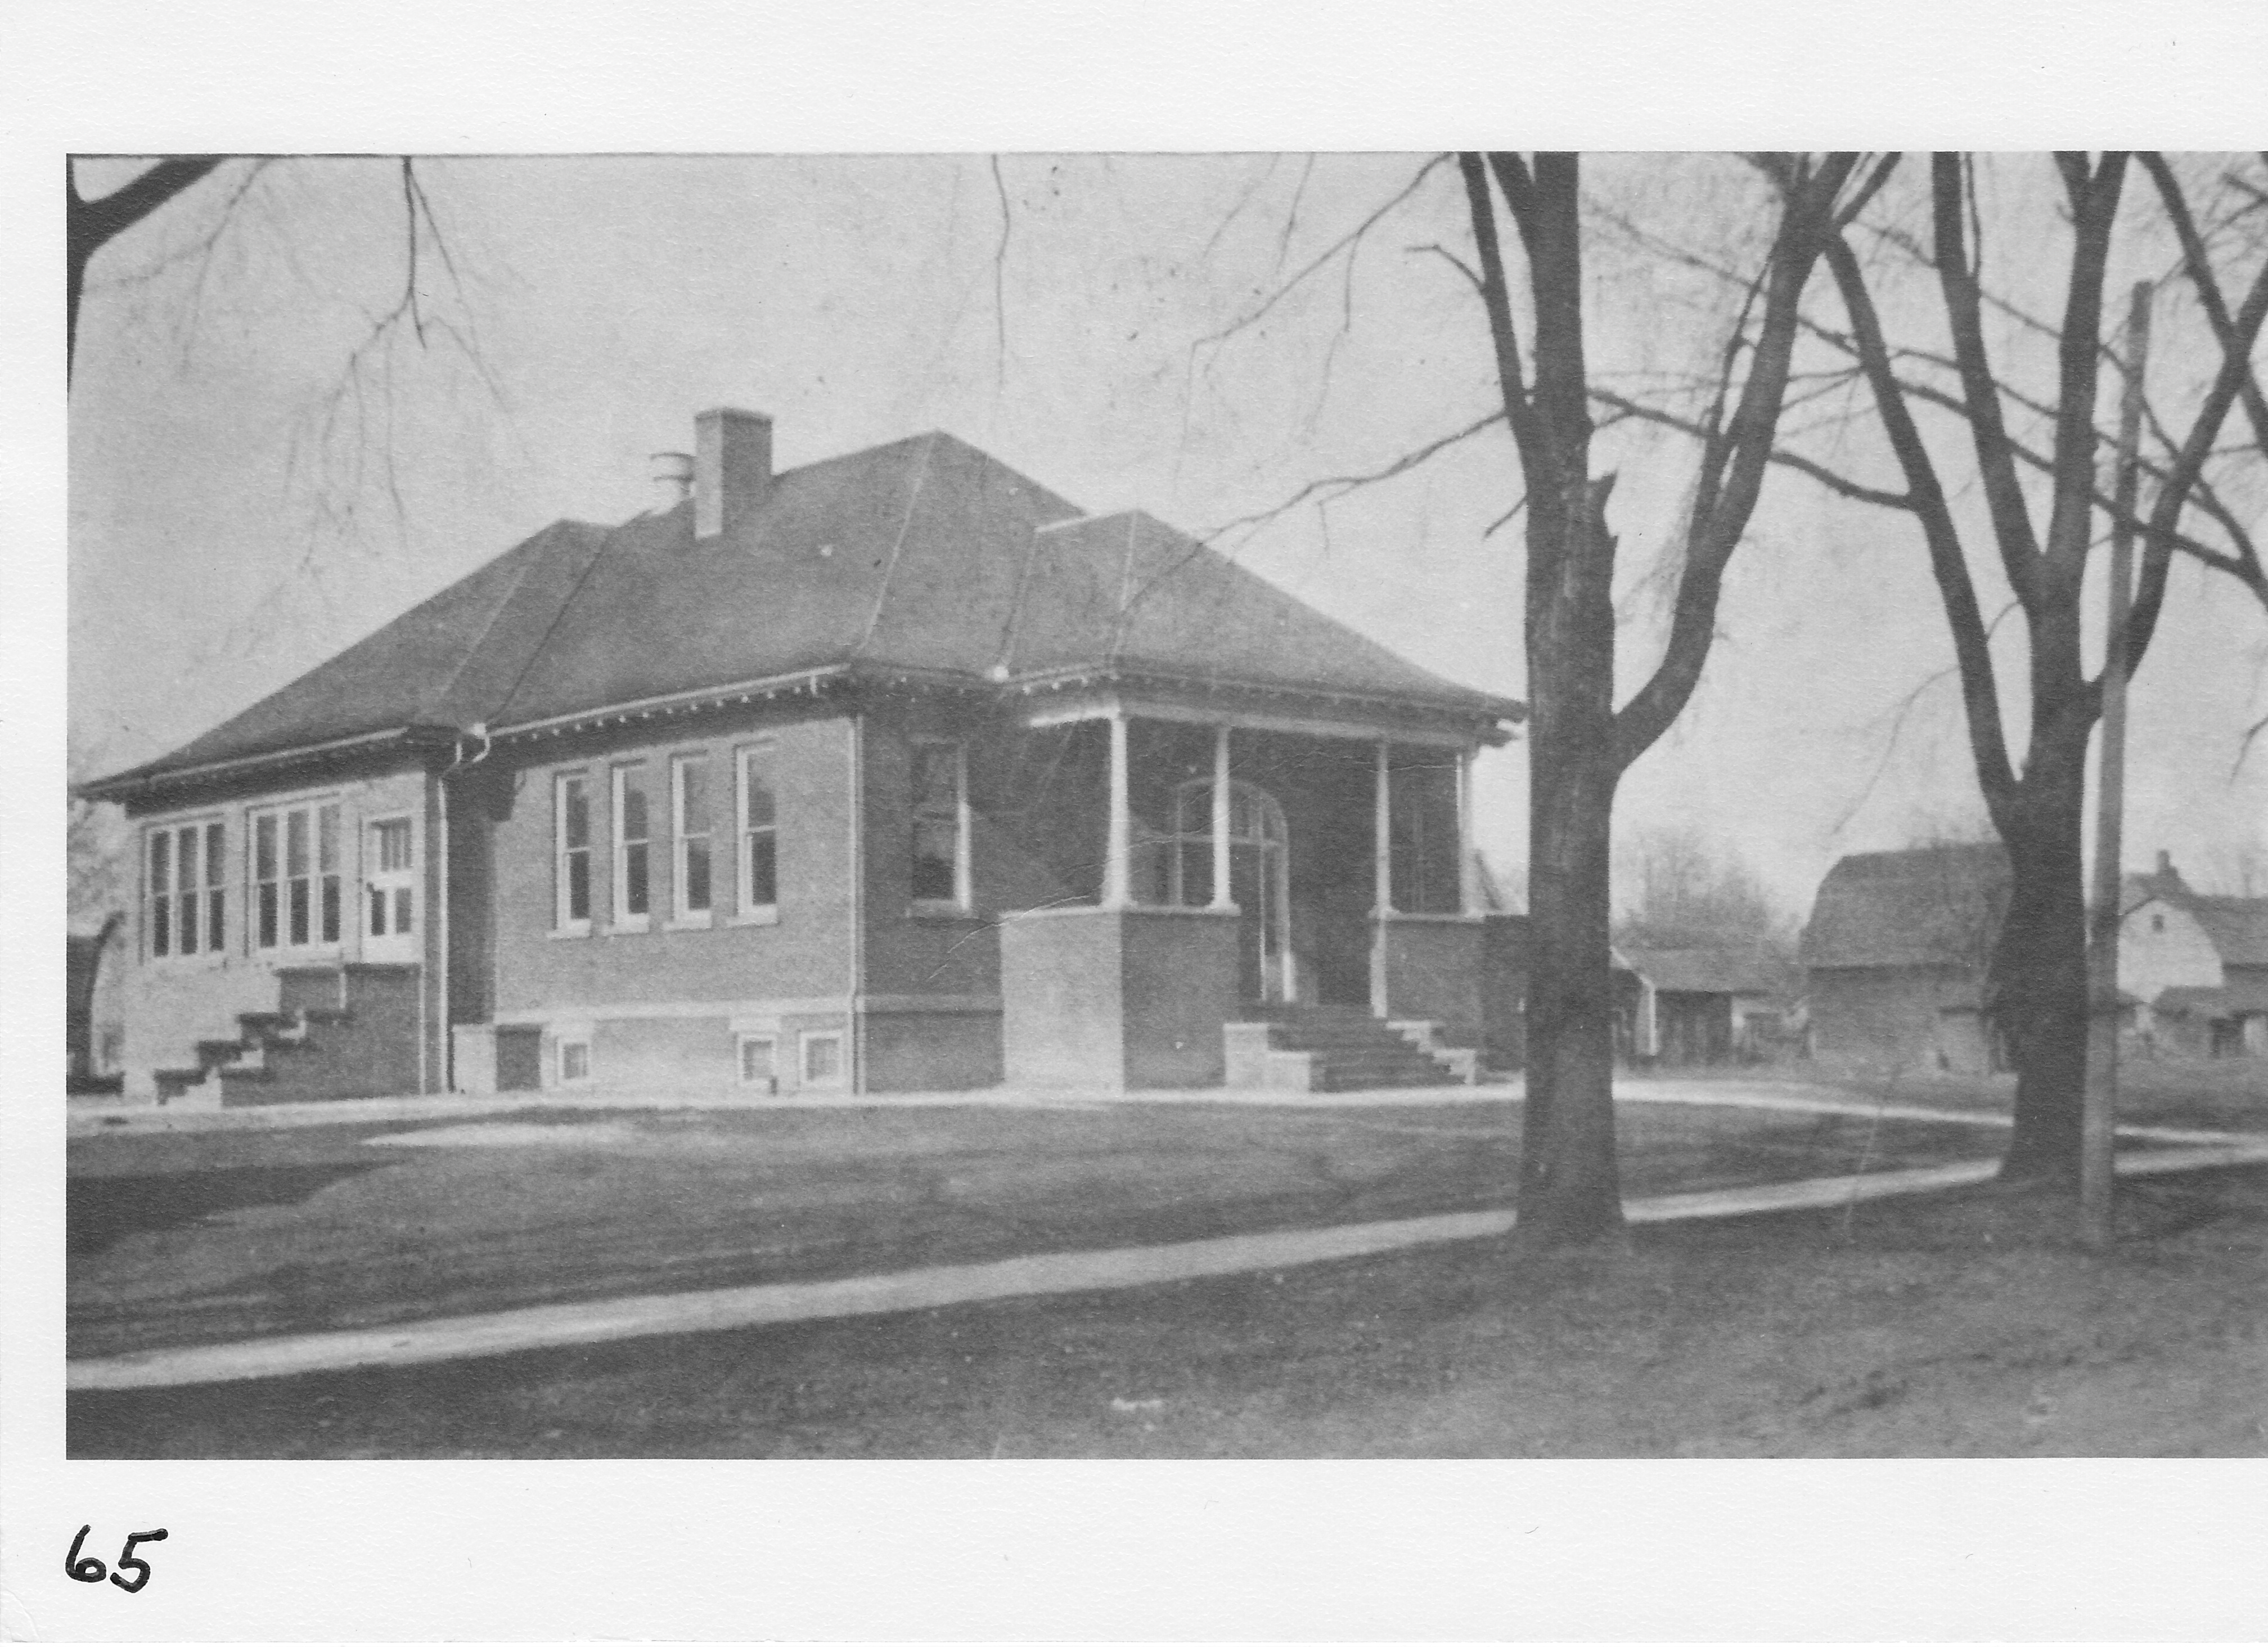 “Little” School after addition.  School built in 1902; addition in 1926.